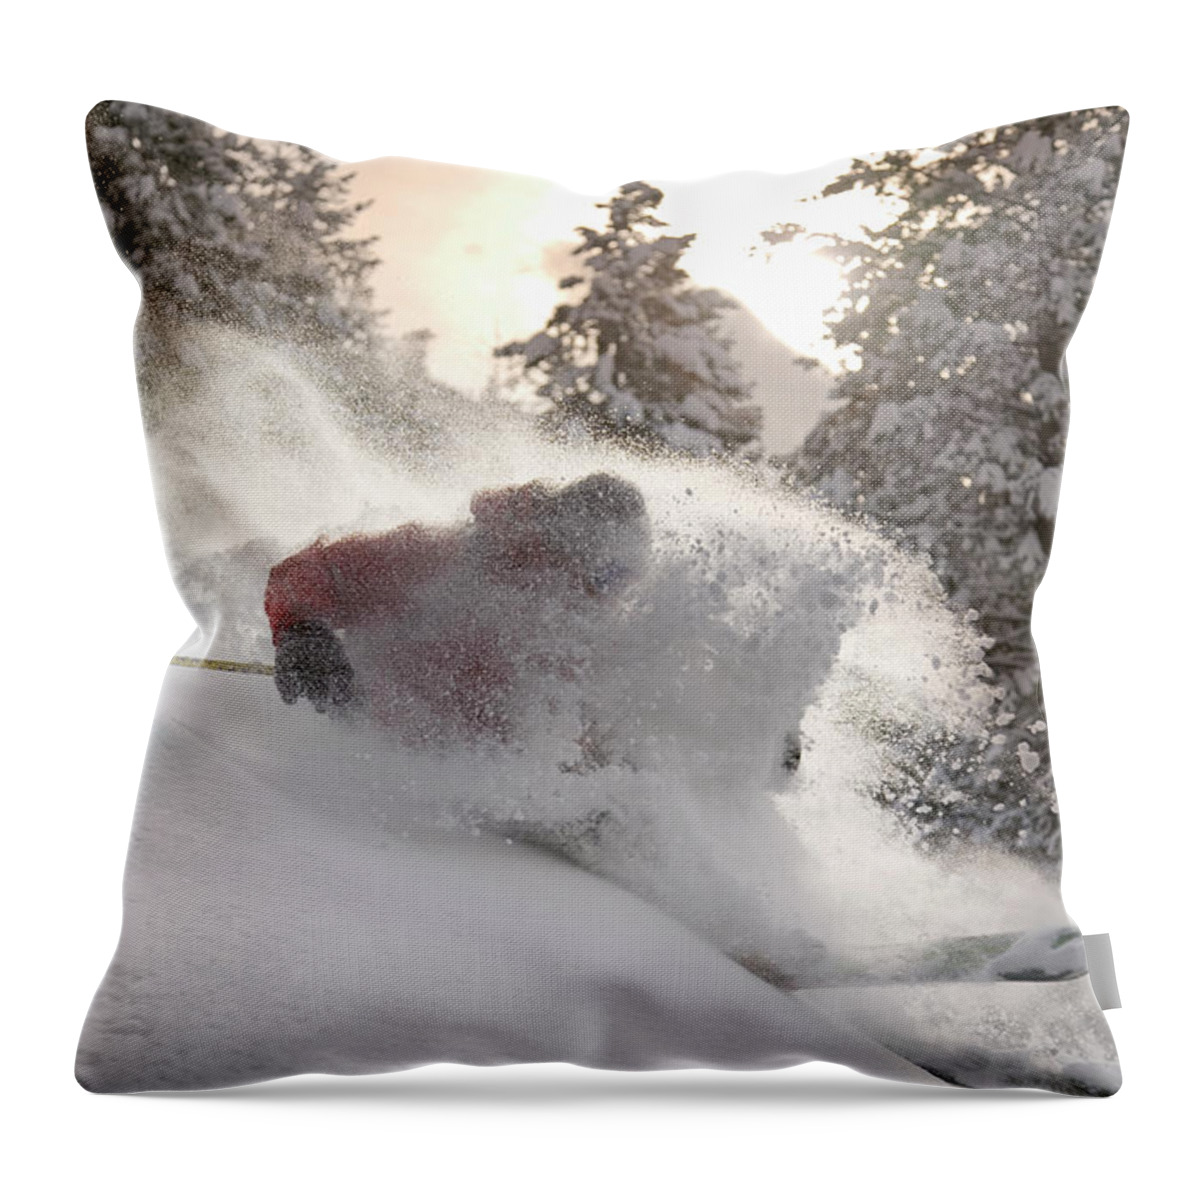 Skiing Throw Pillow featuring the photograph Man Skiing In Powder Snow, Side View by Karl Weatherly